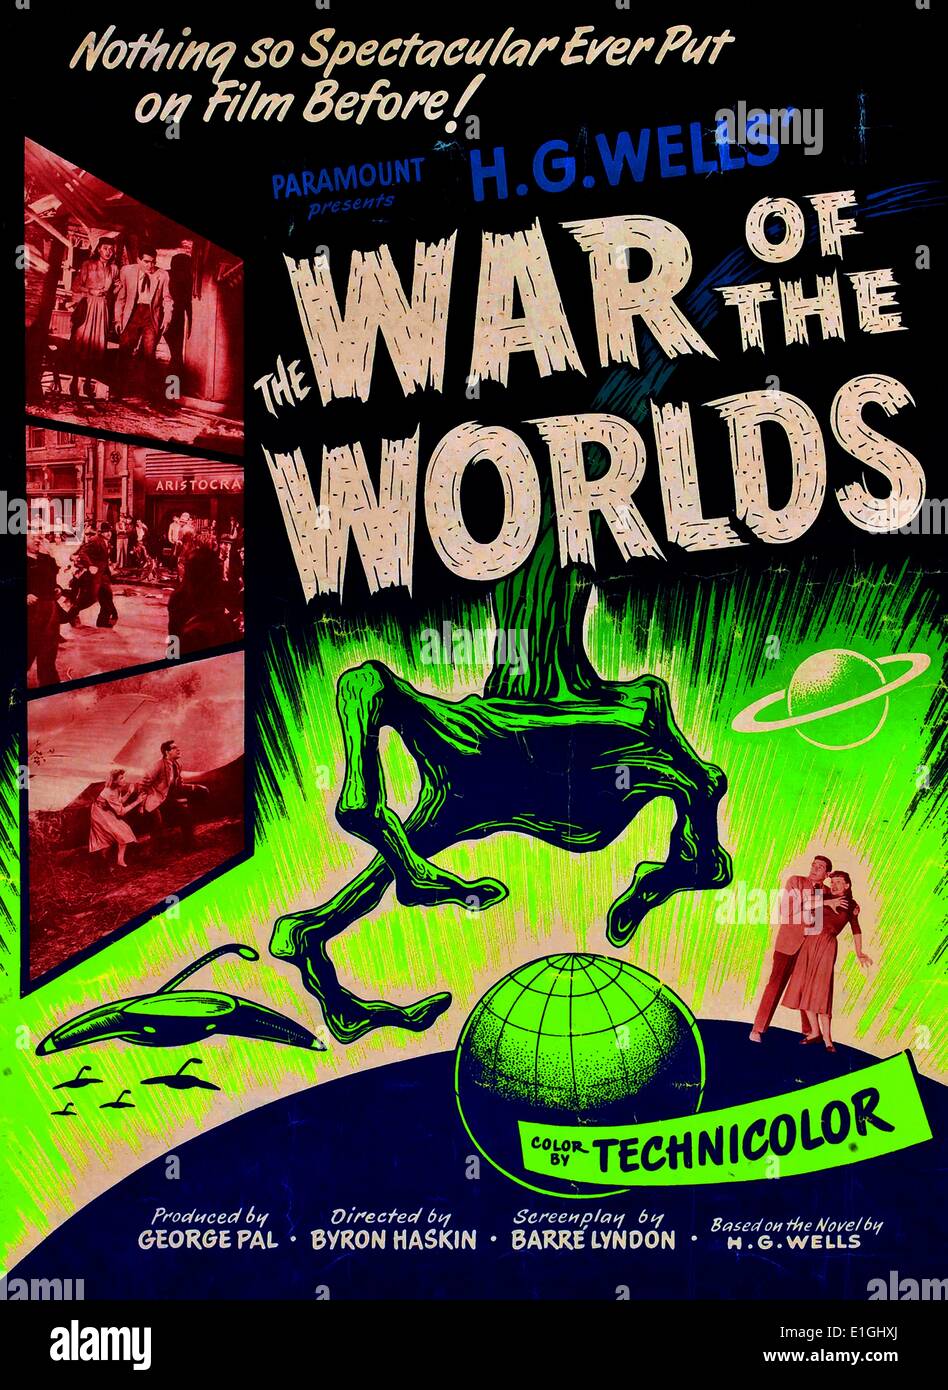 The War of the Worlds a 1953 Paramount Pictures Technicolor science fiction film starring Gene Barry and Ann Robinson. Stock Photo